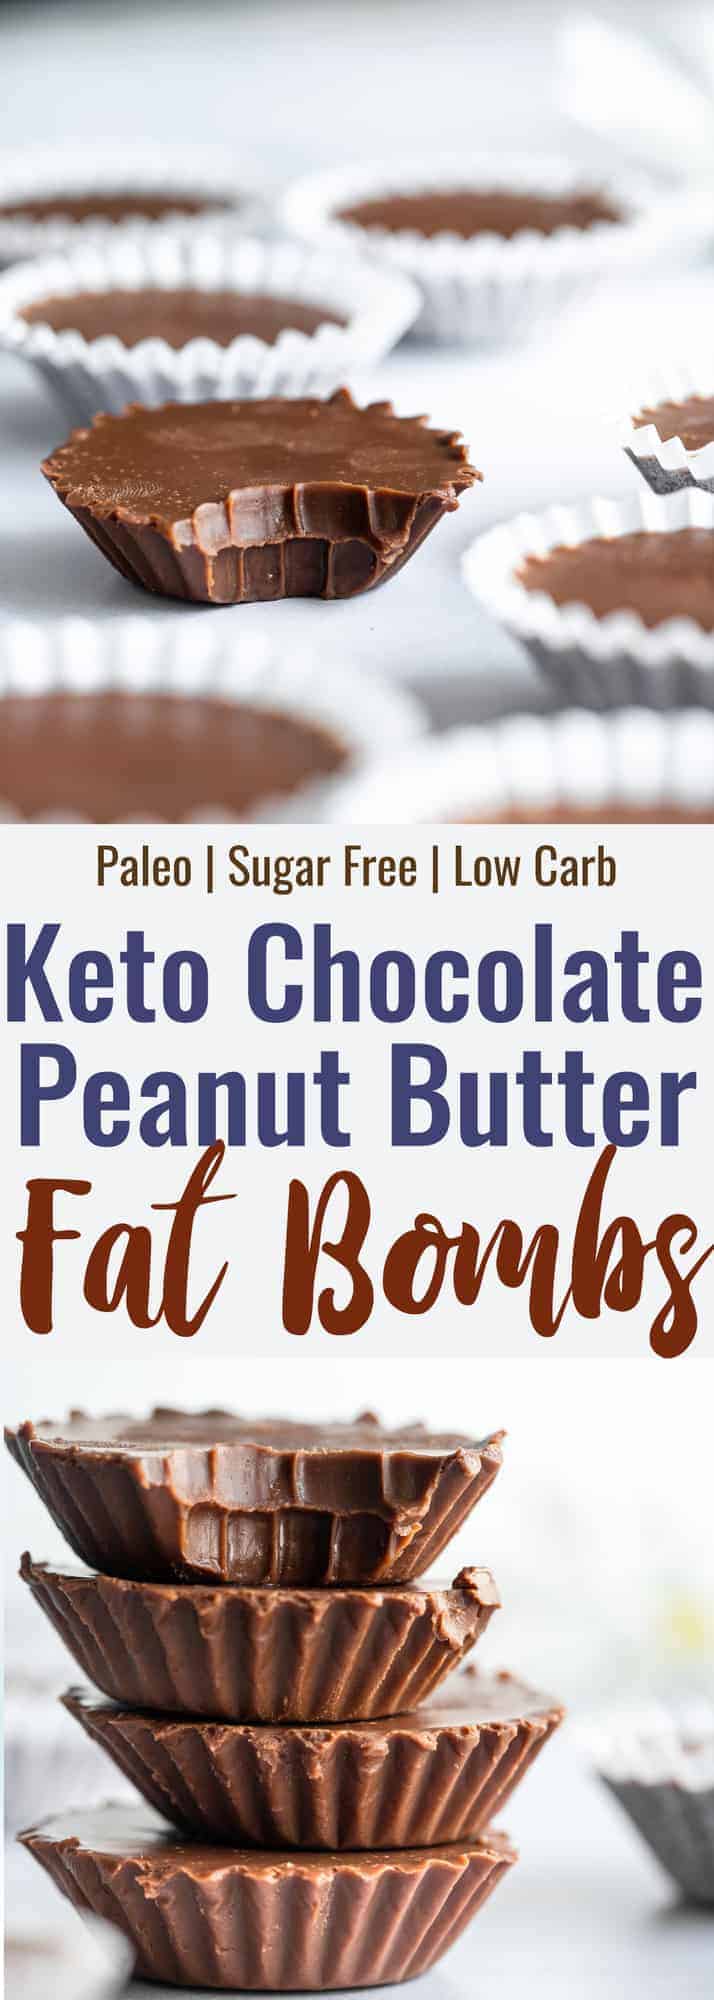 chocolate peanut butter keto fat bombs collage of 2 images